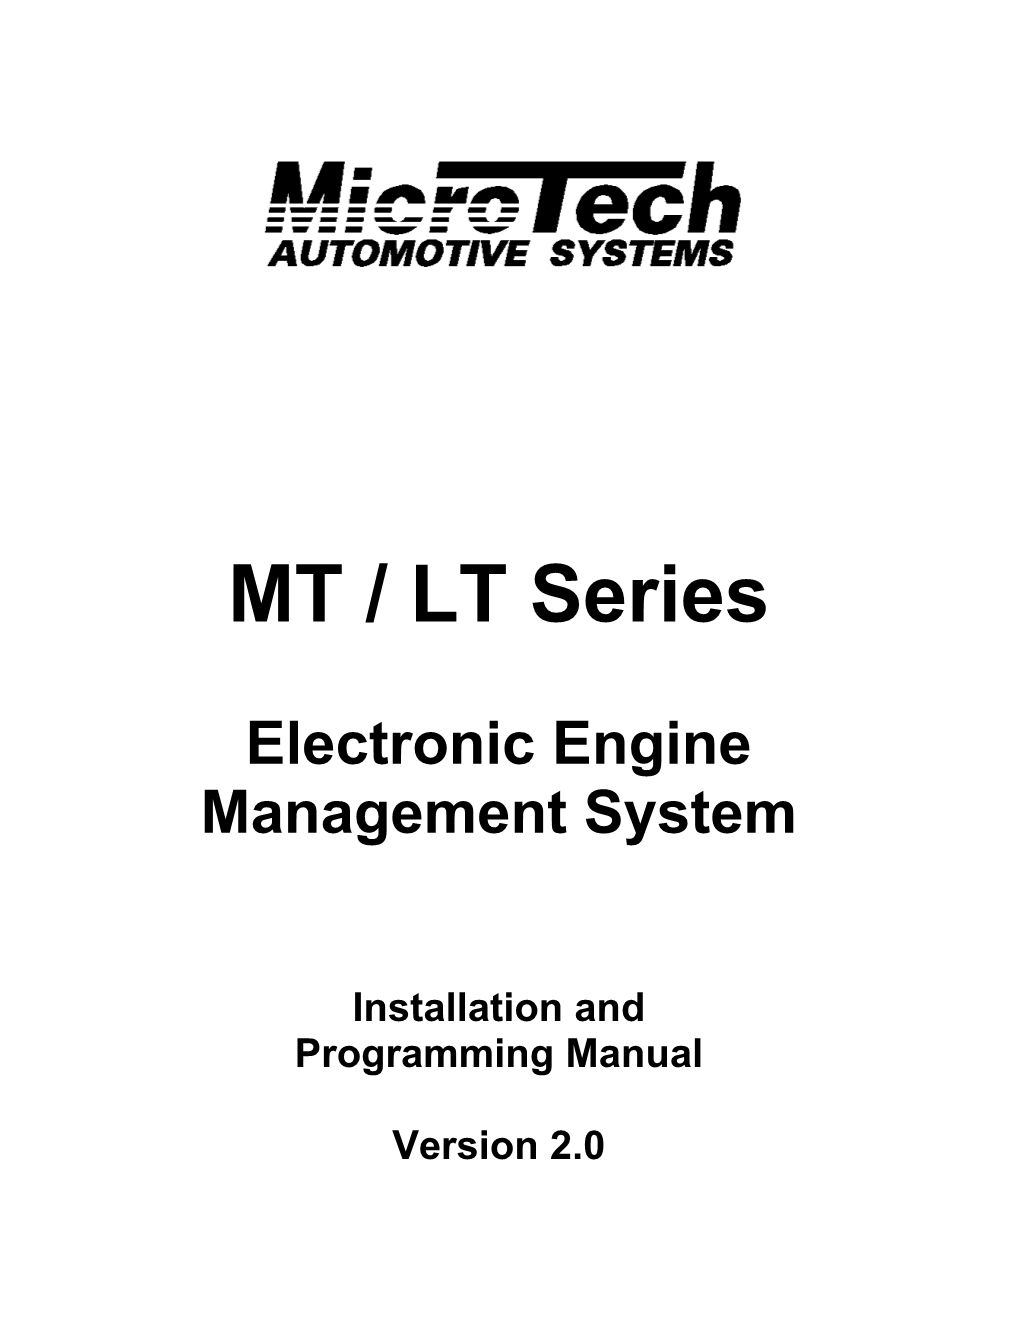 Microtech MT Series Engine Management System